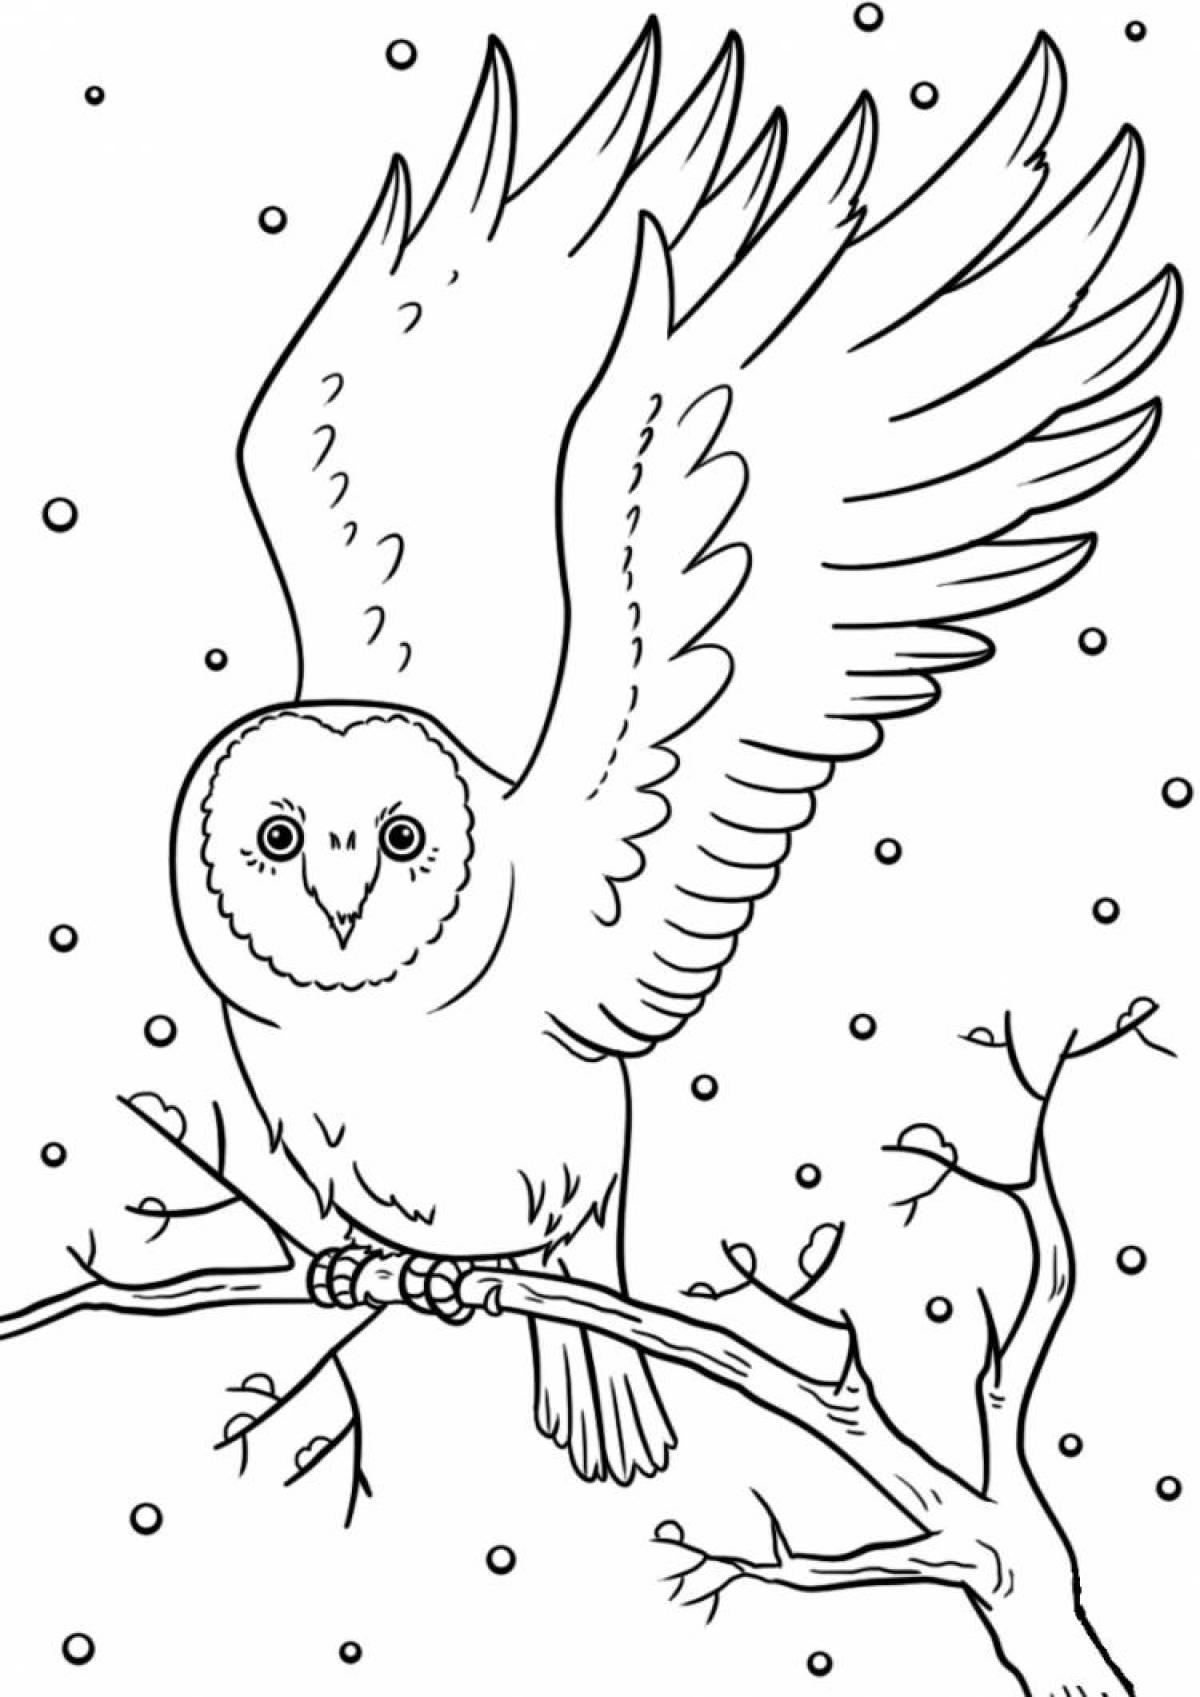 Exciting winter bird coloring book for kids